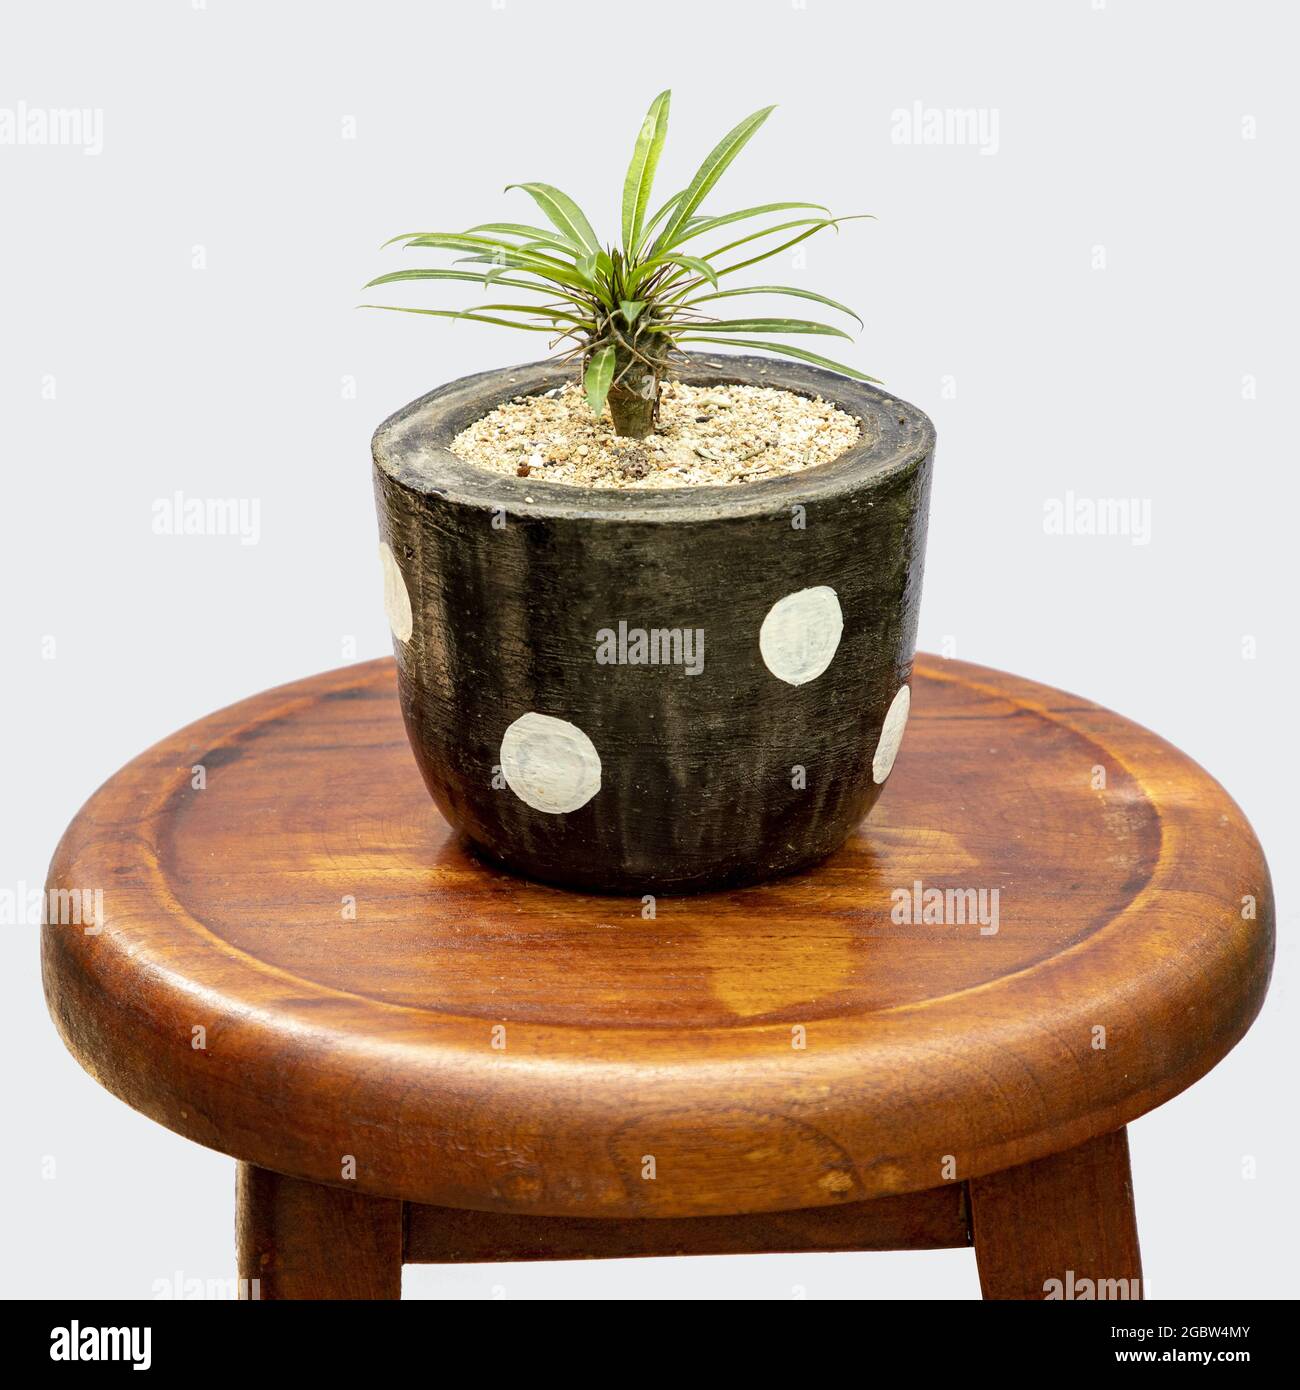 Closeup shot of a wind orchid plant in a clay pot on a wooden stool Stock Photo